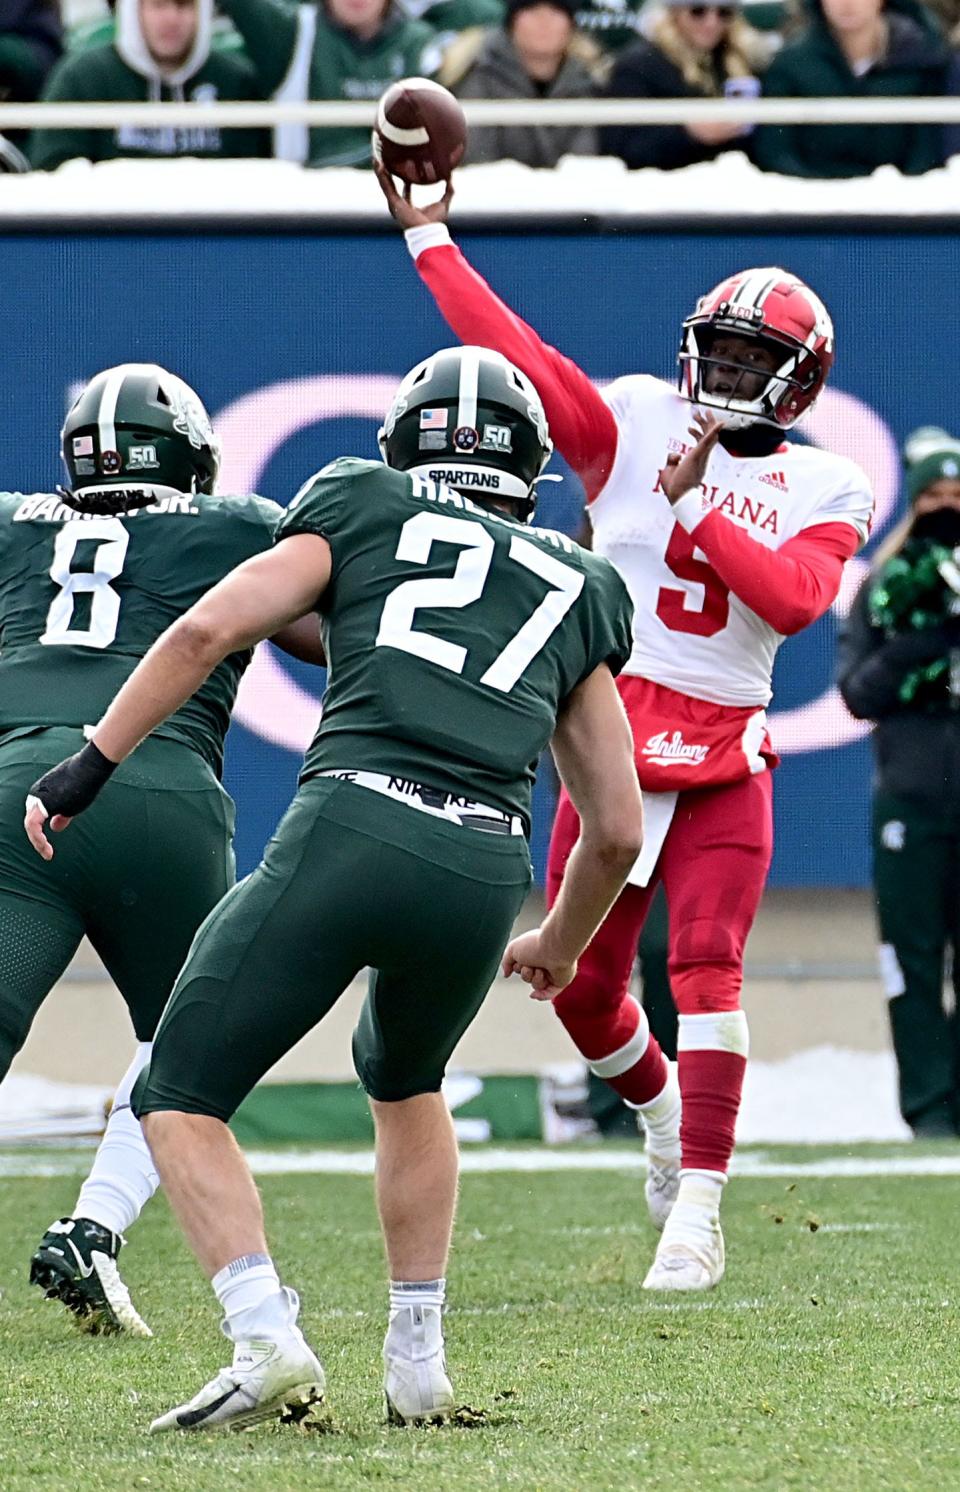 Nov 19, 2022; East Lansing, Michigan, USA;  Indiana Hoosiers quarterback Dexter Williams II (5) throws upfield against the Michigan State Spartans at Spartan Stadium. Mandatory Credit: Dale Young-USA TODAY Sports